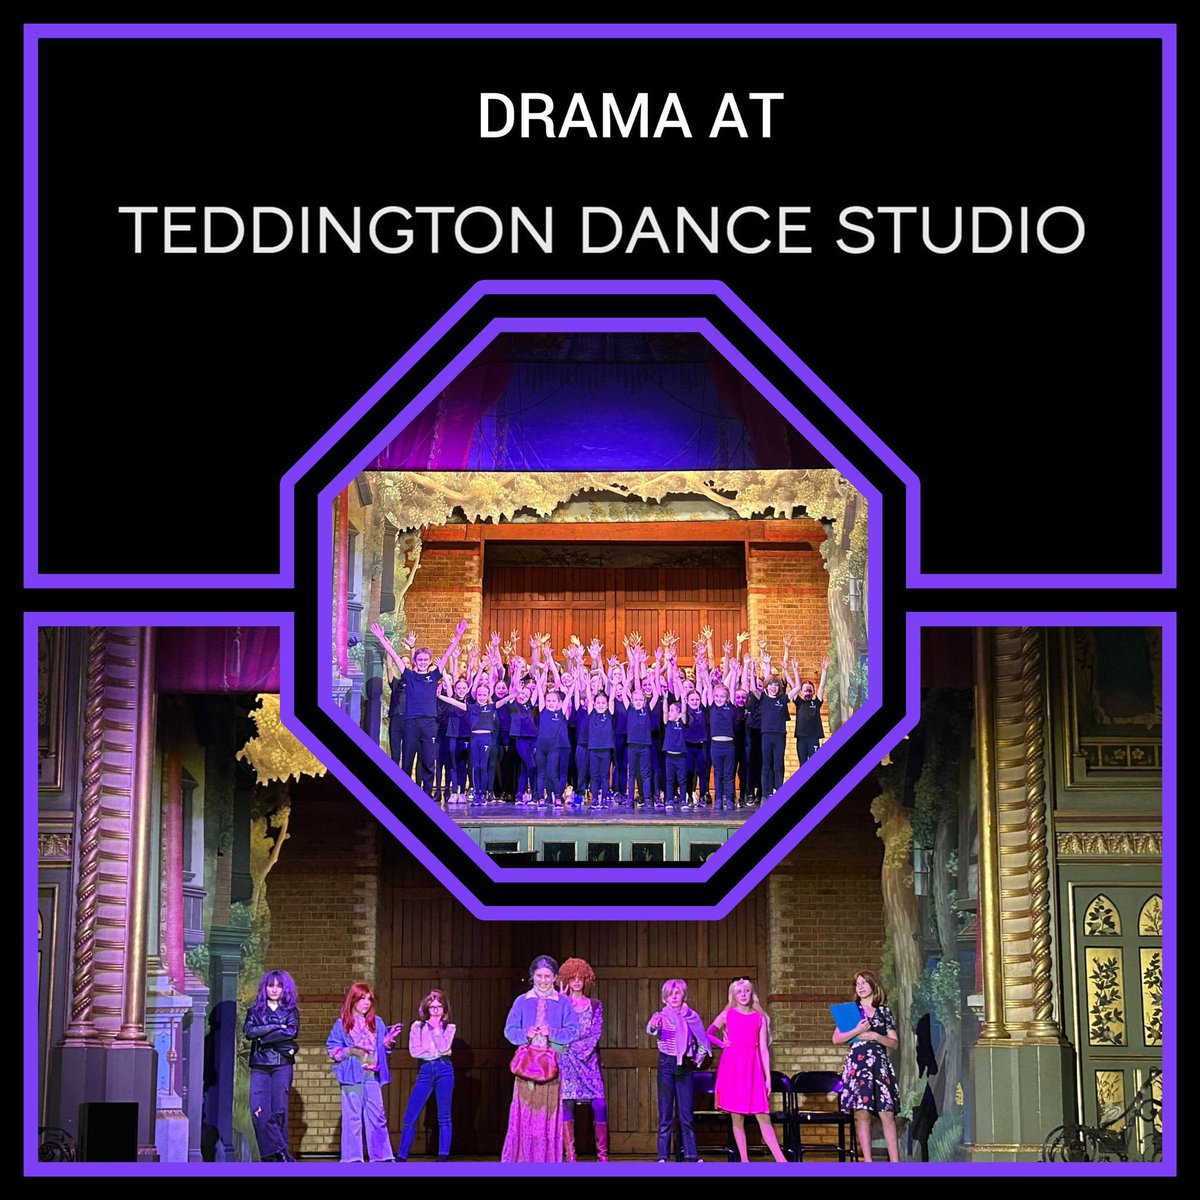 Drama at @tds_lovedance . At Teddington Dance Studio - Grow in confidence, performance opportunities, LAMDA Exams, Acting Awards… we’ve got it all! #teddington #teddingtonmums #teddingtontown #teddingtondancestudio #teddingtondramaclasses #teddingtondanceclasses…